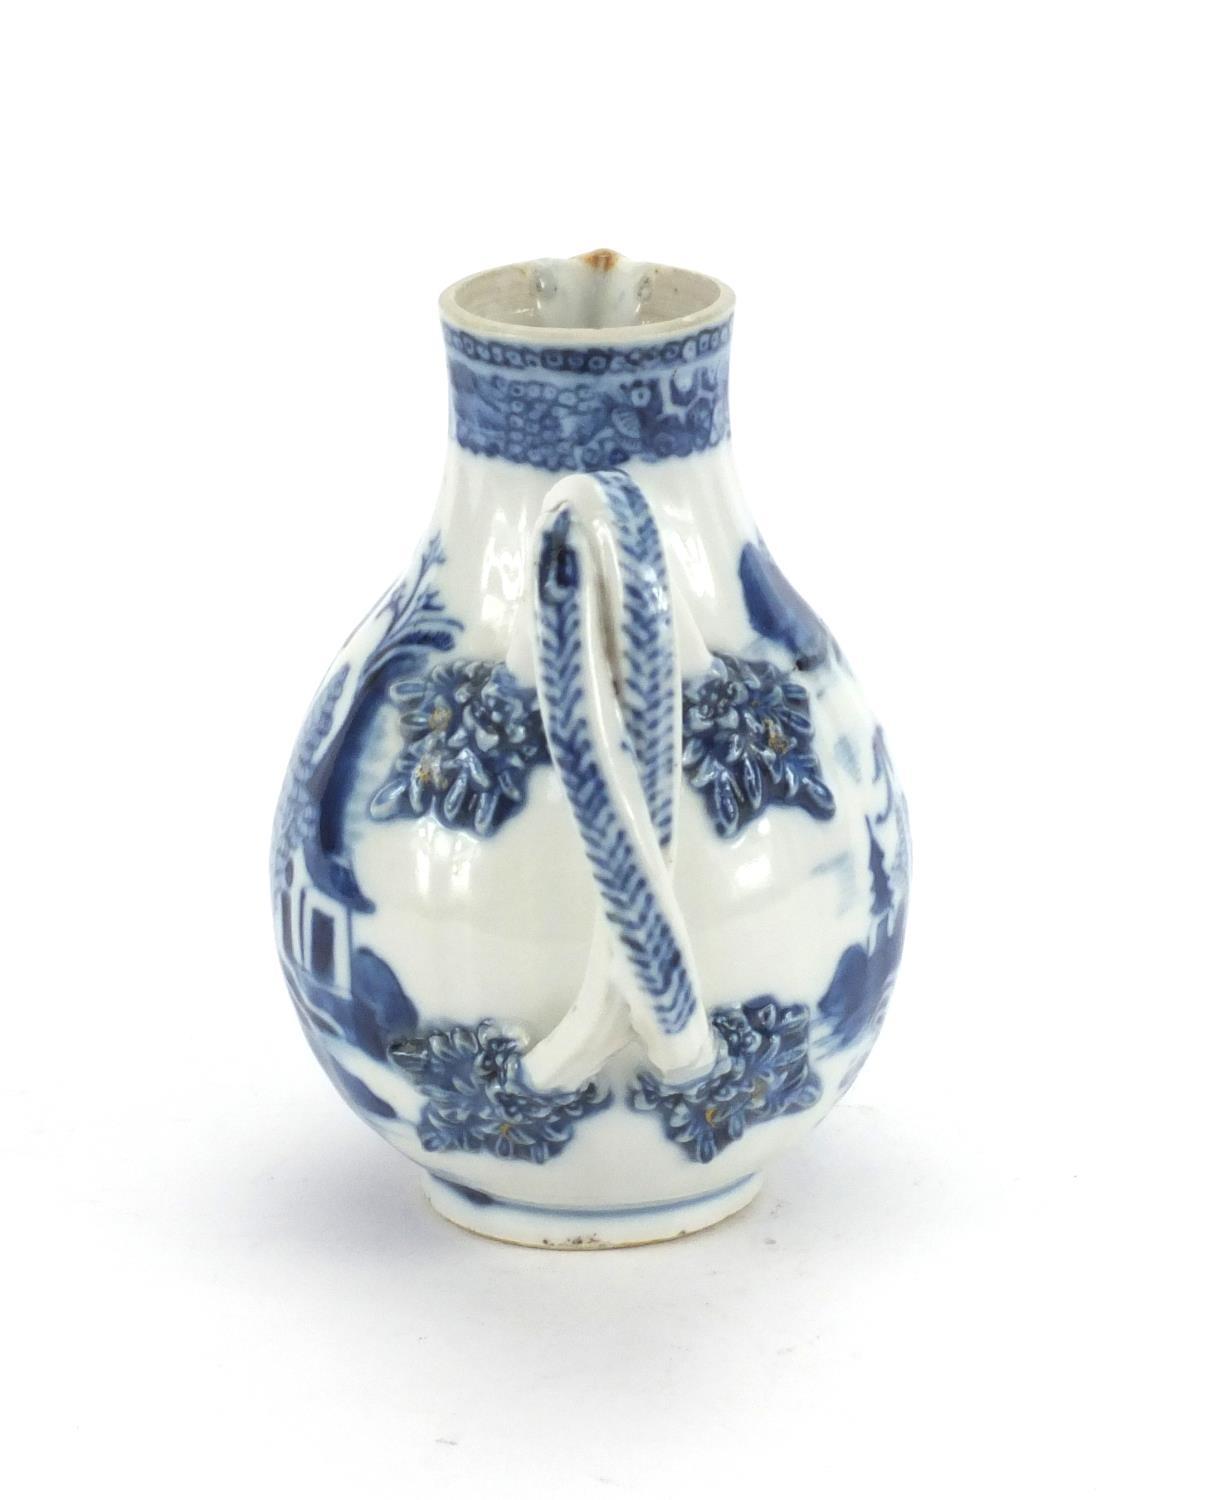 18th century Chinese blue and white porcelain sparrow beak jug, hand painted with willow pattern - Image 3 of 7